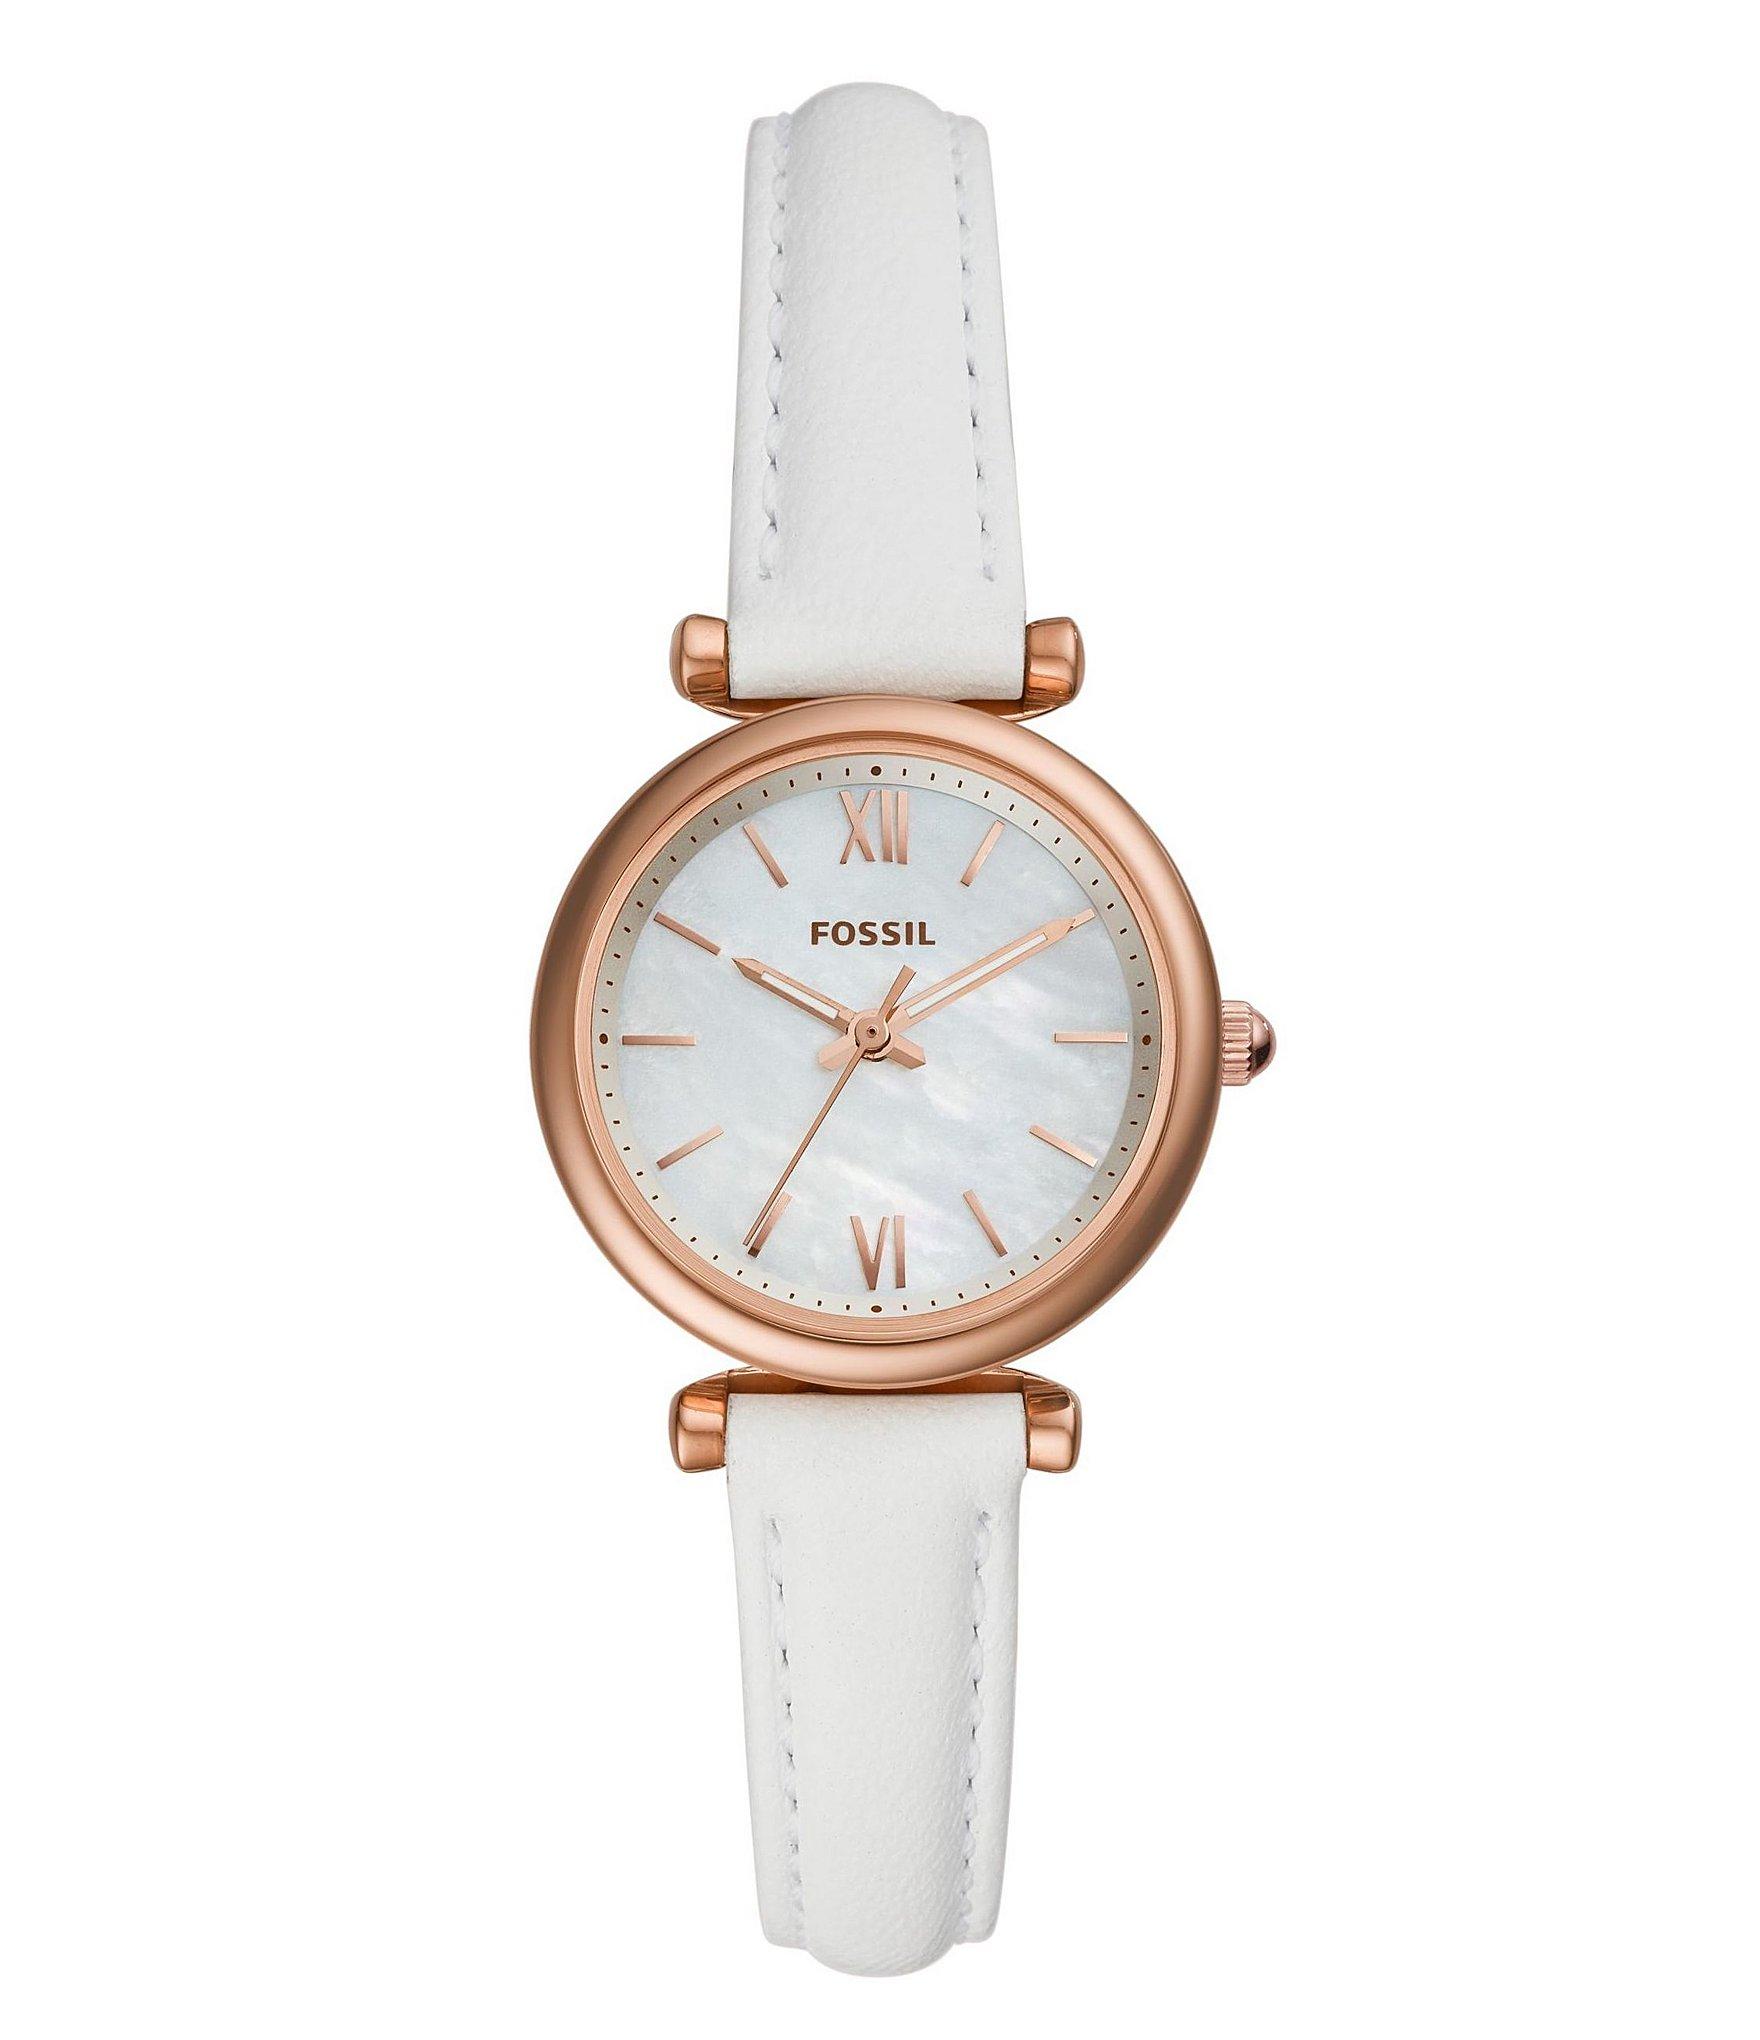 Fossil Carlie Mini Three-hand White Leather Watch in White - Save 38% ...